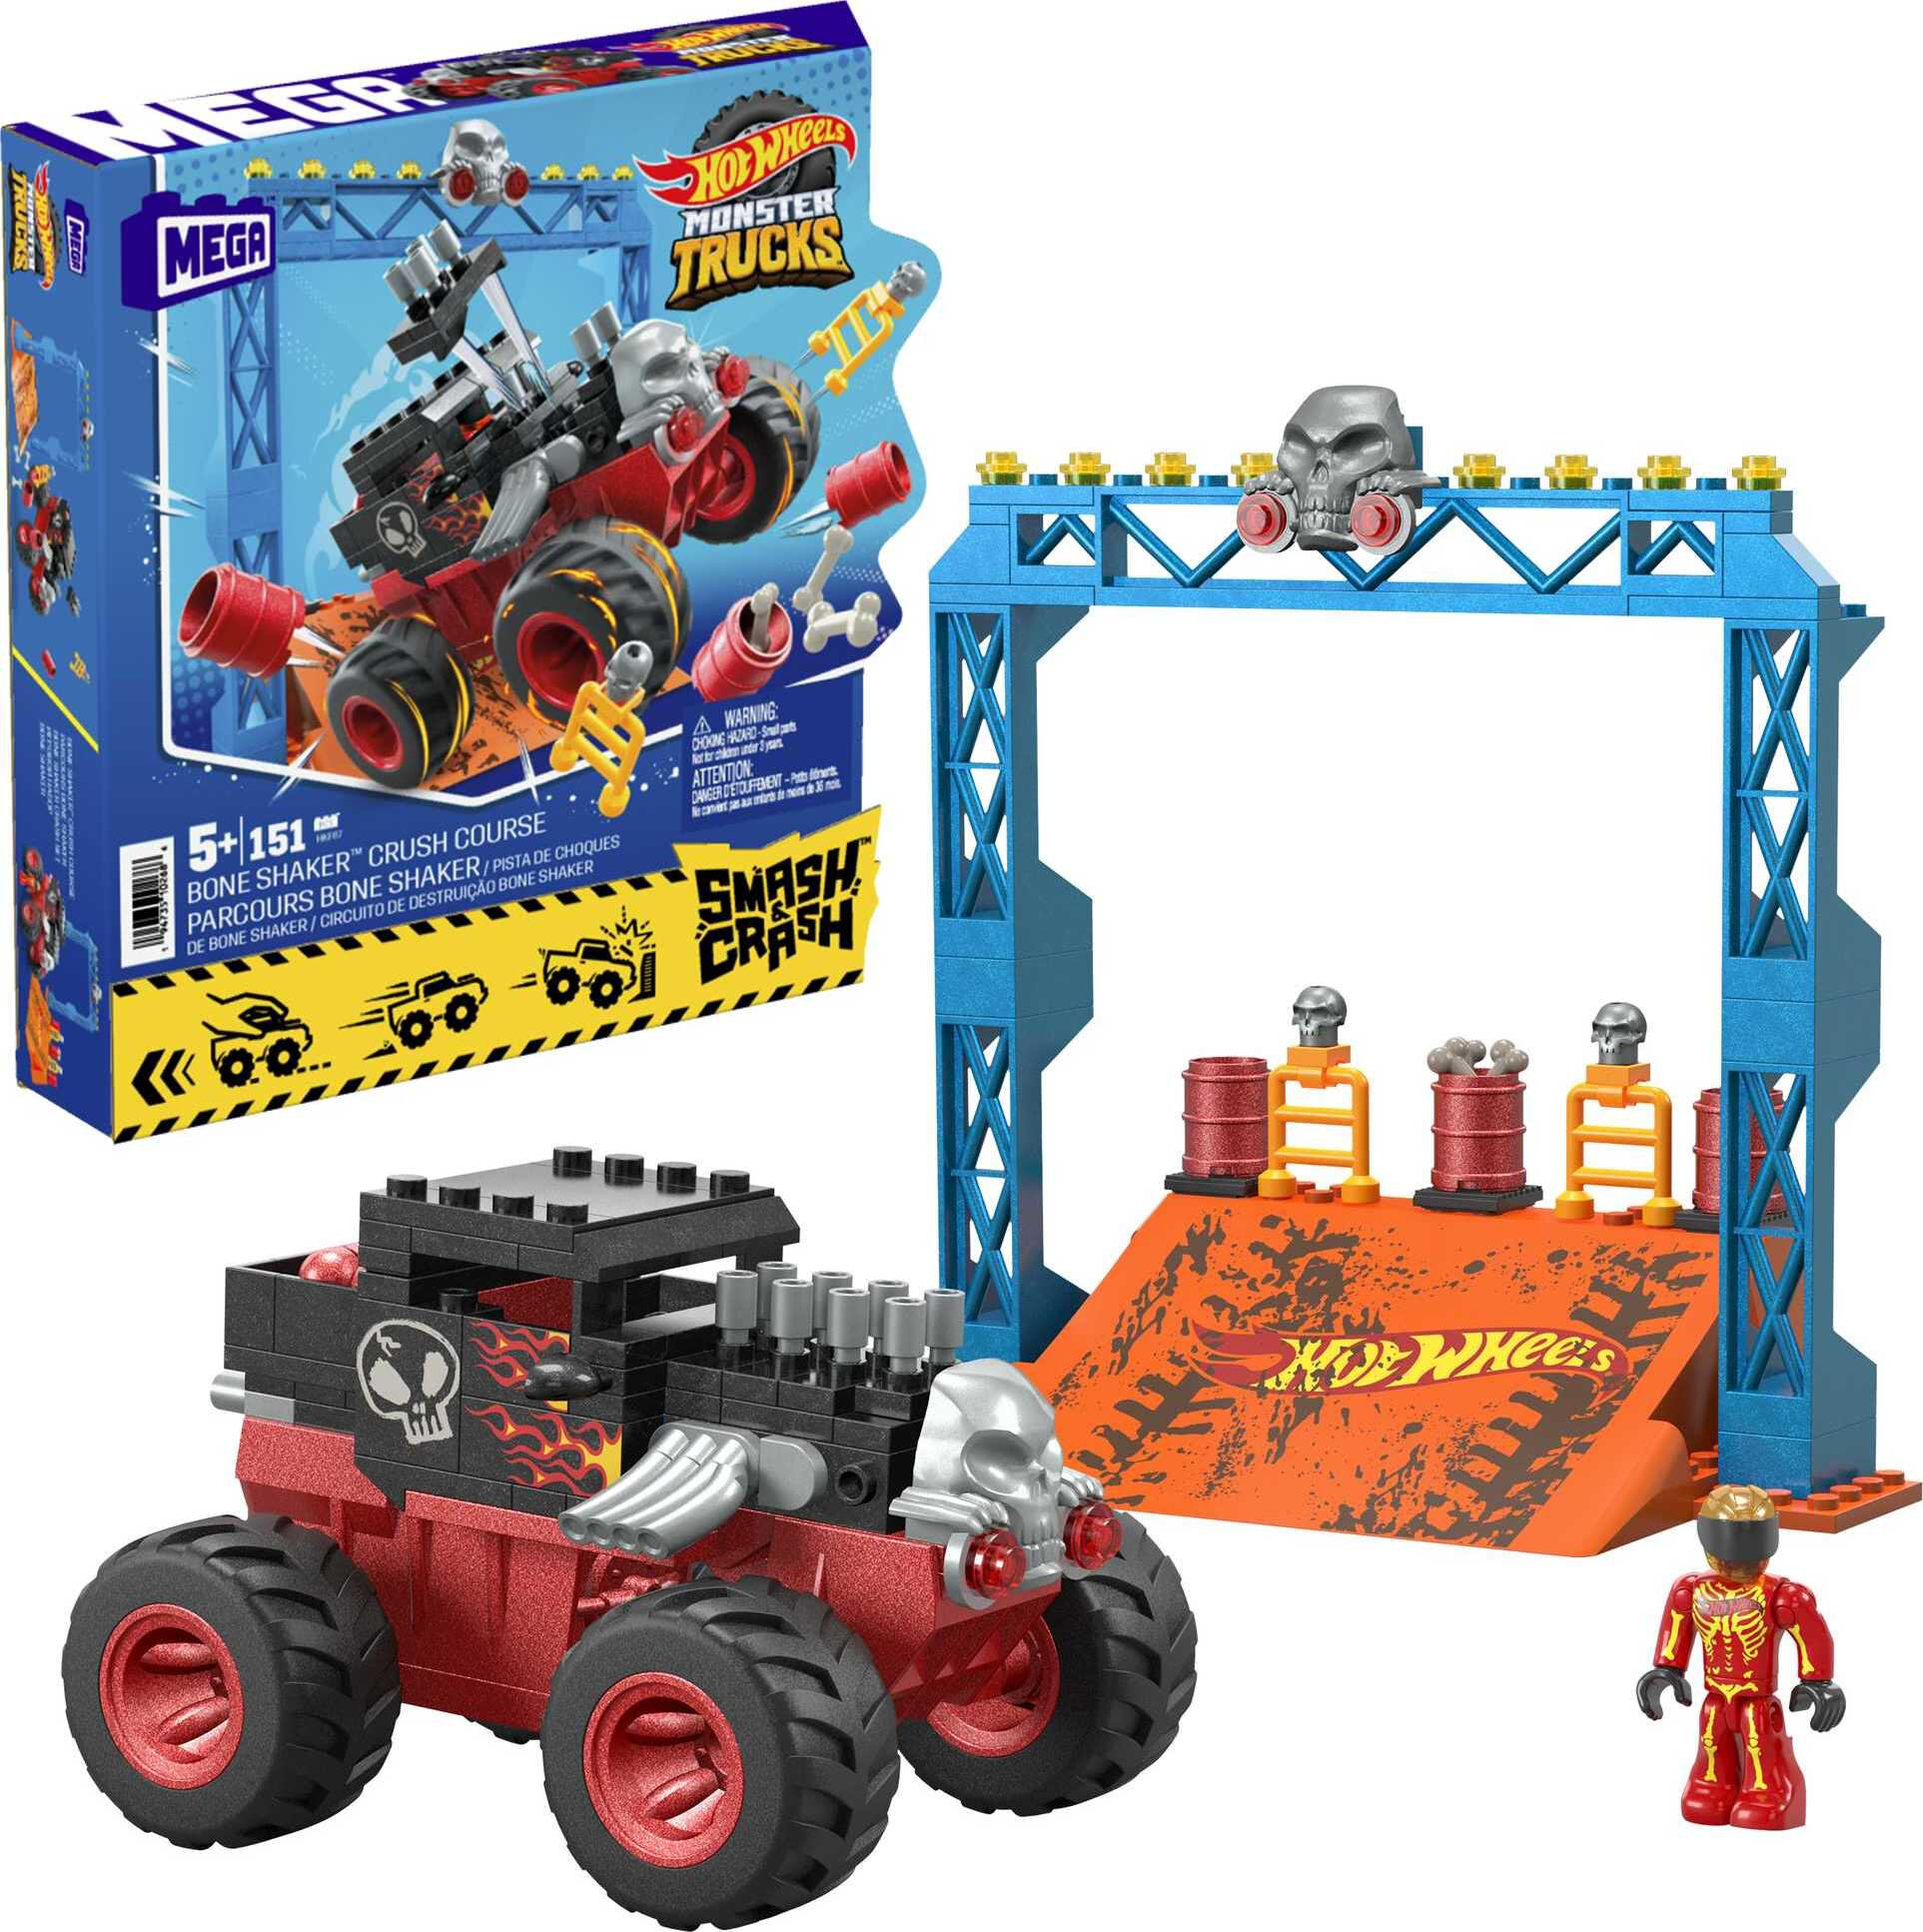 MEGA Hot Wheels Bone Shaker Crush Course Monster Truck Building Toy with 1 Figure (151 Pieces) - image 1 of 7